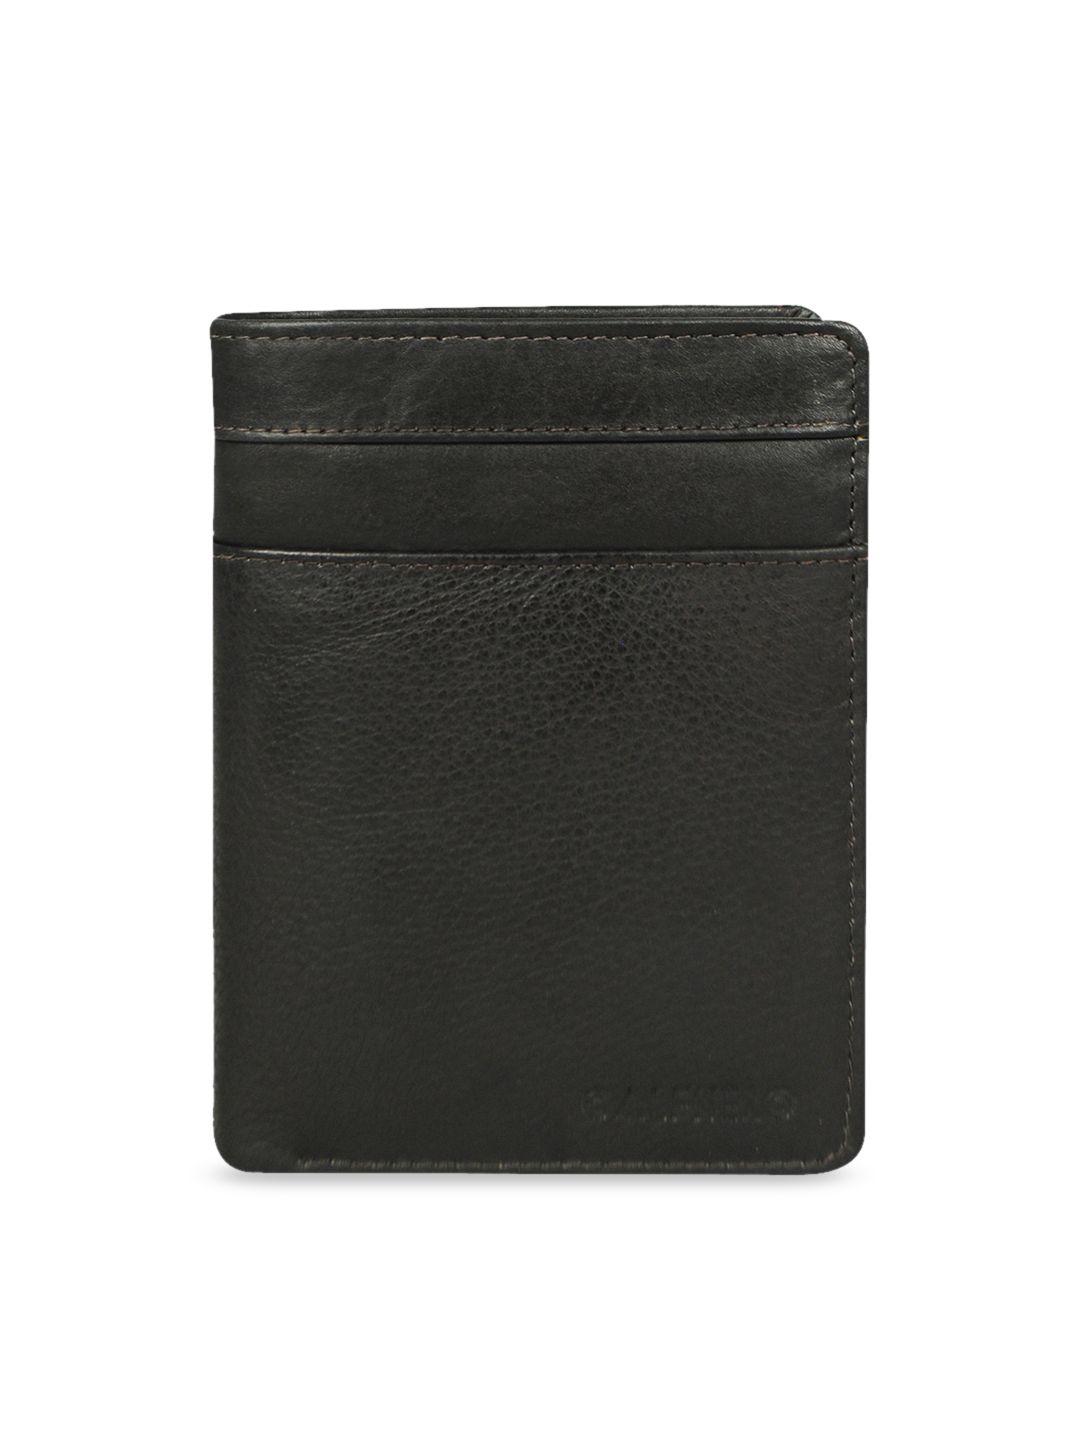 calfnero men black solid leather two fold wallet